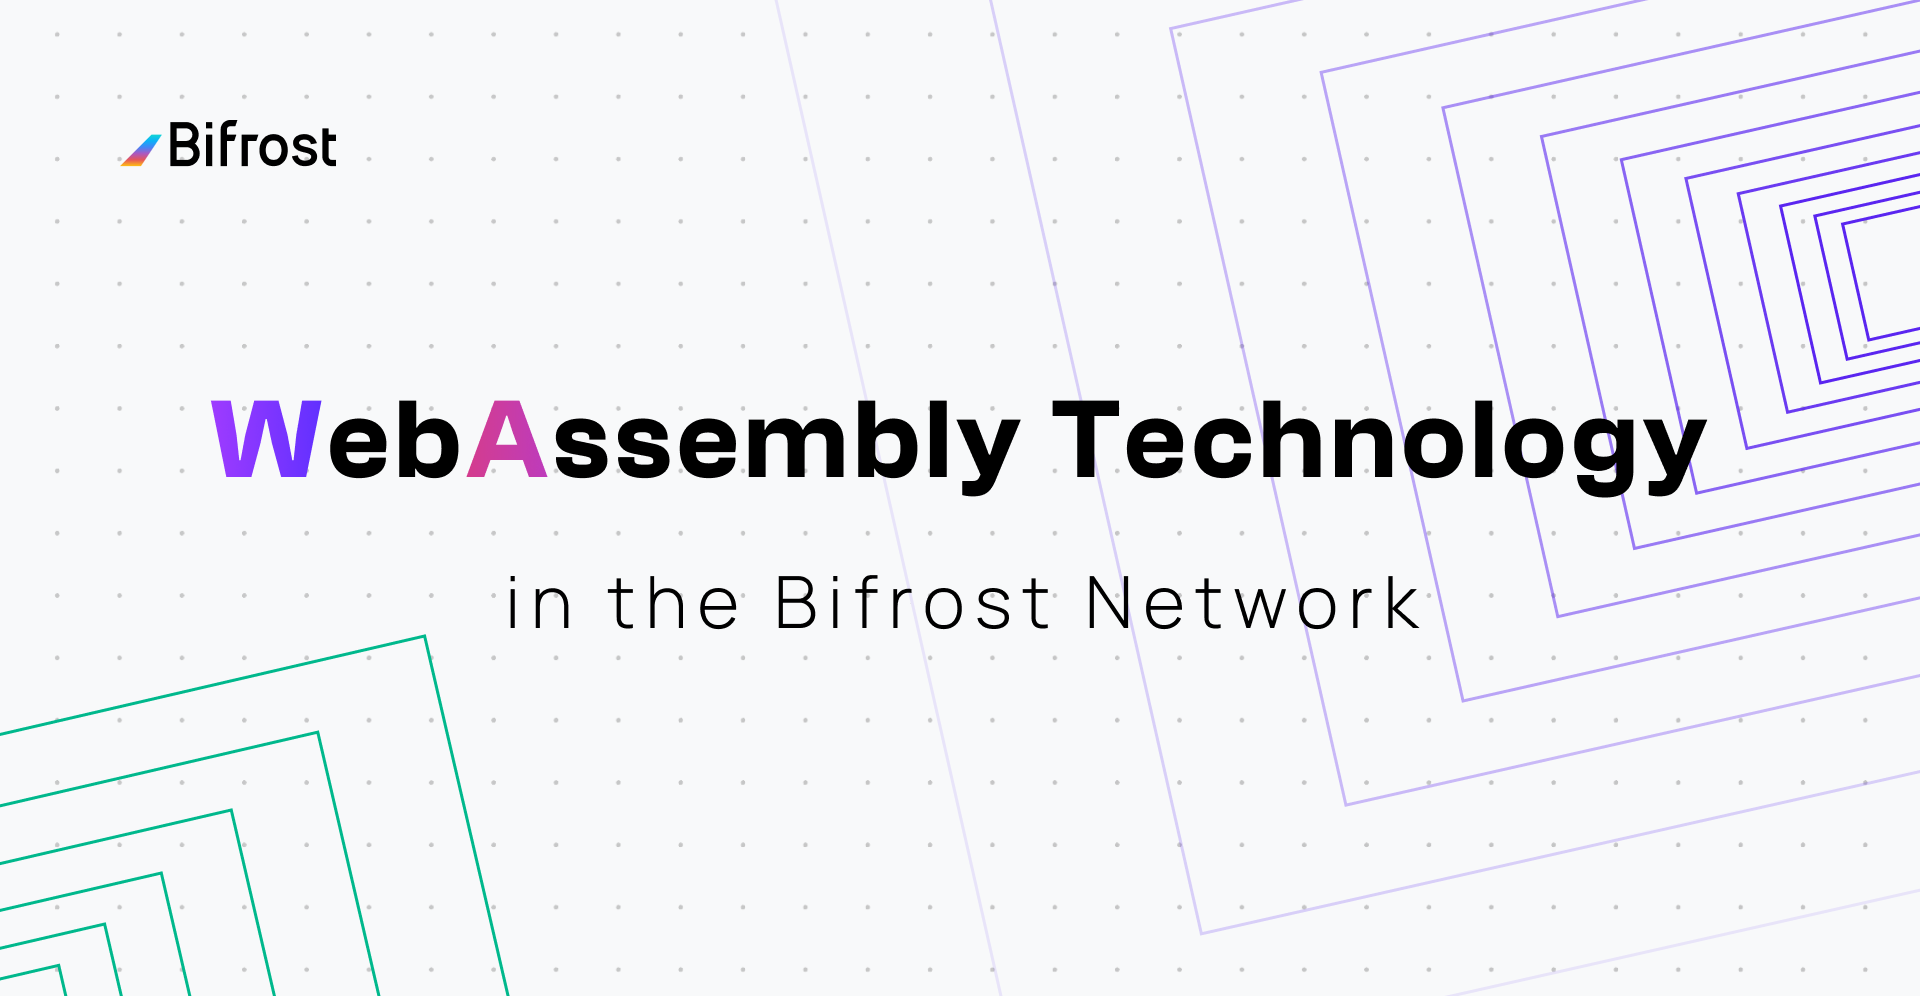 WebAssembly Technology in the Bifrost Network